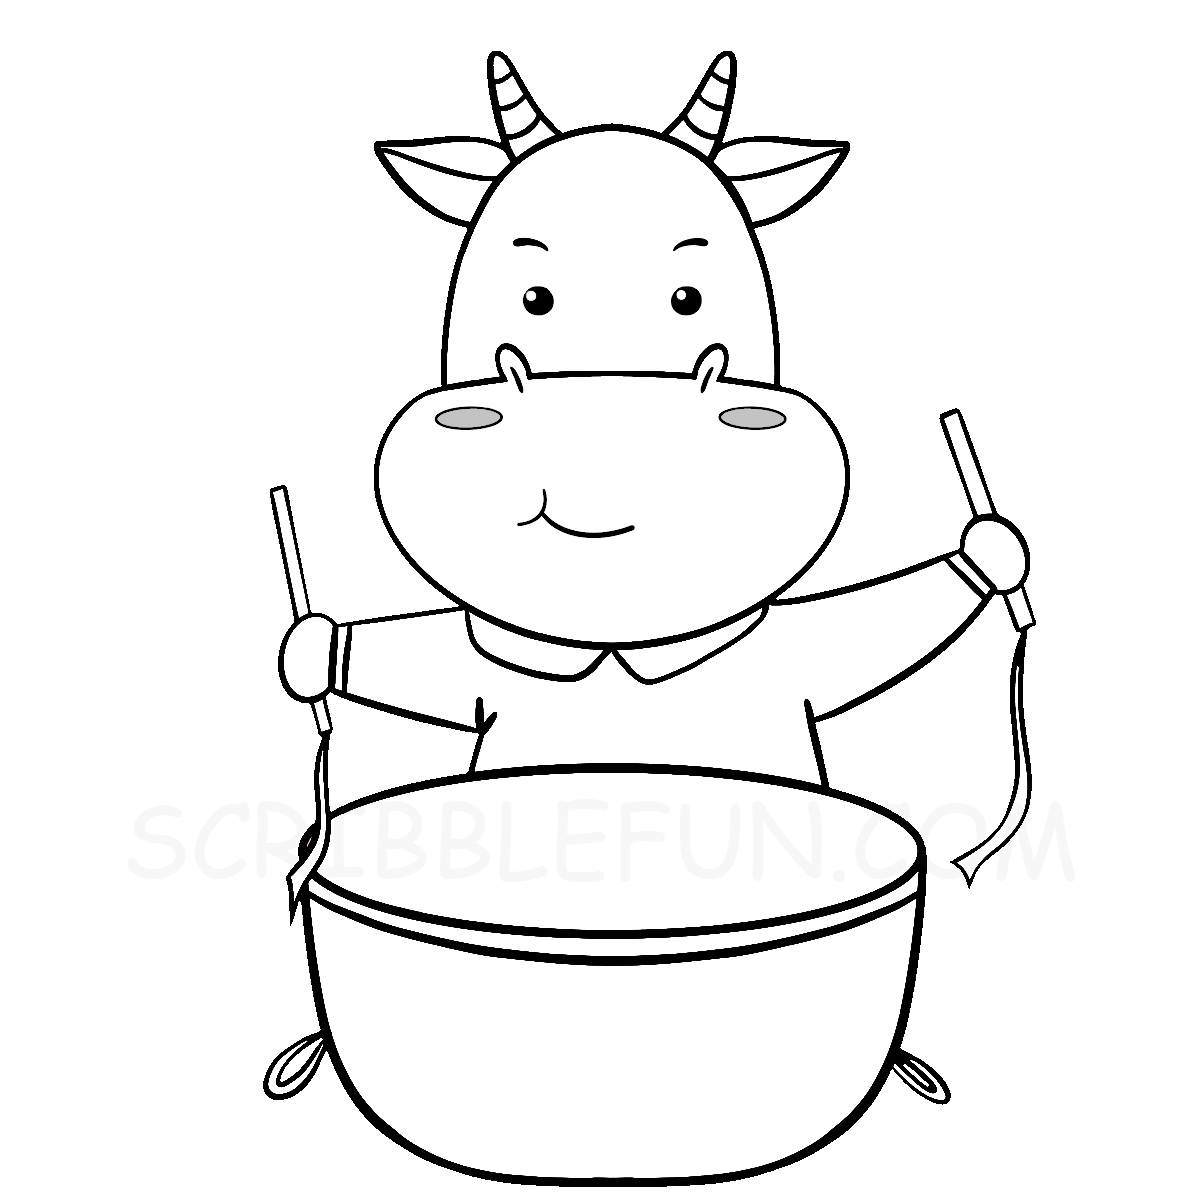 Ox playing a drum